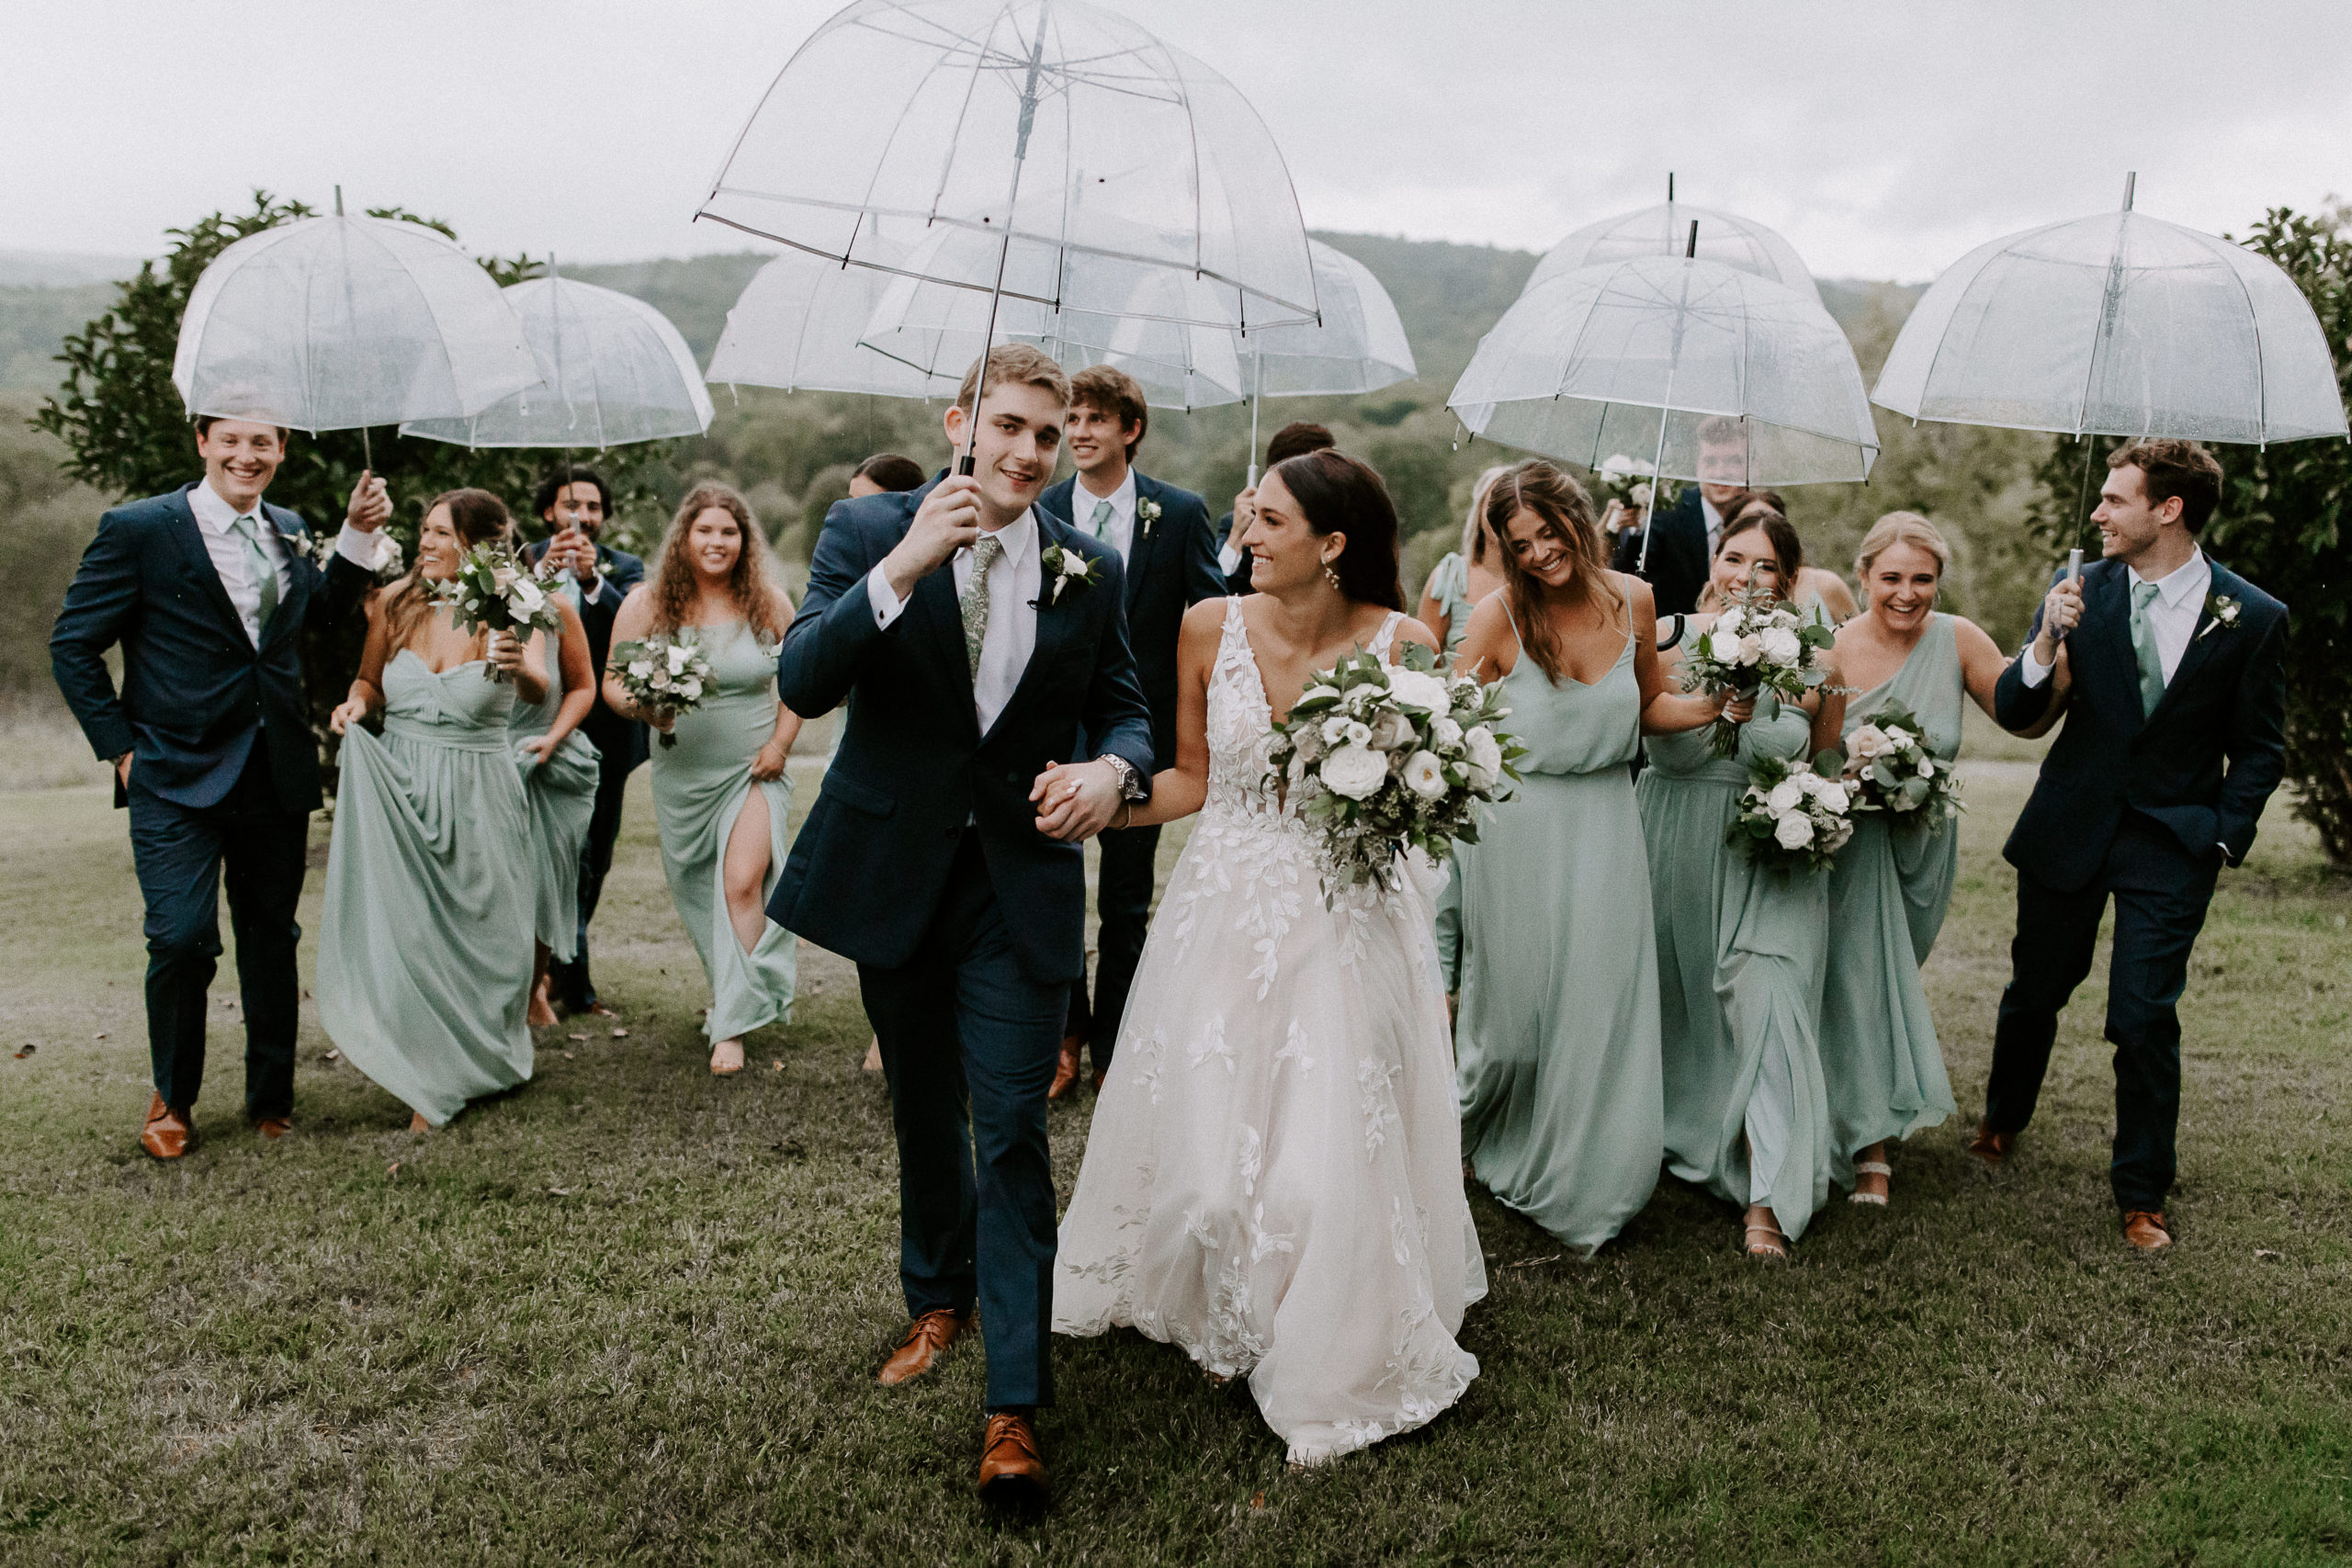 A bride and groom walking through a field followed by their wedding party and everyone is holding umbrellas